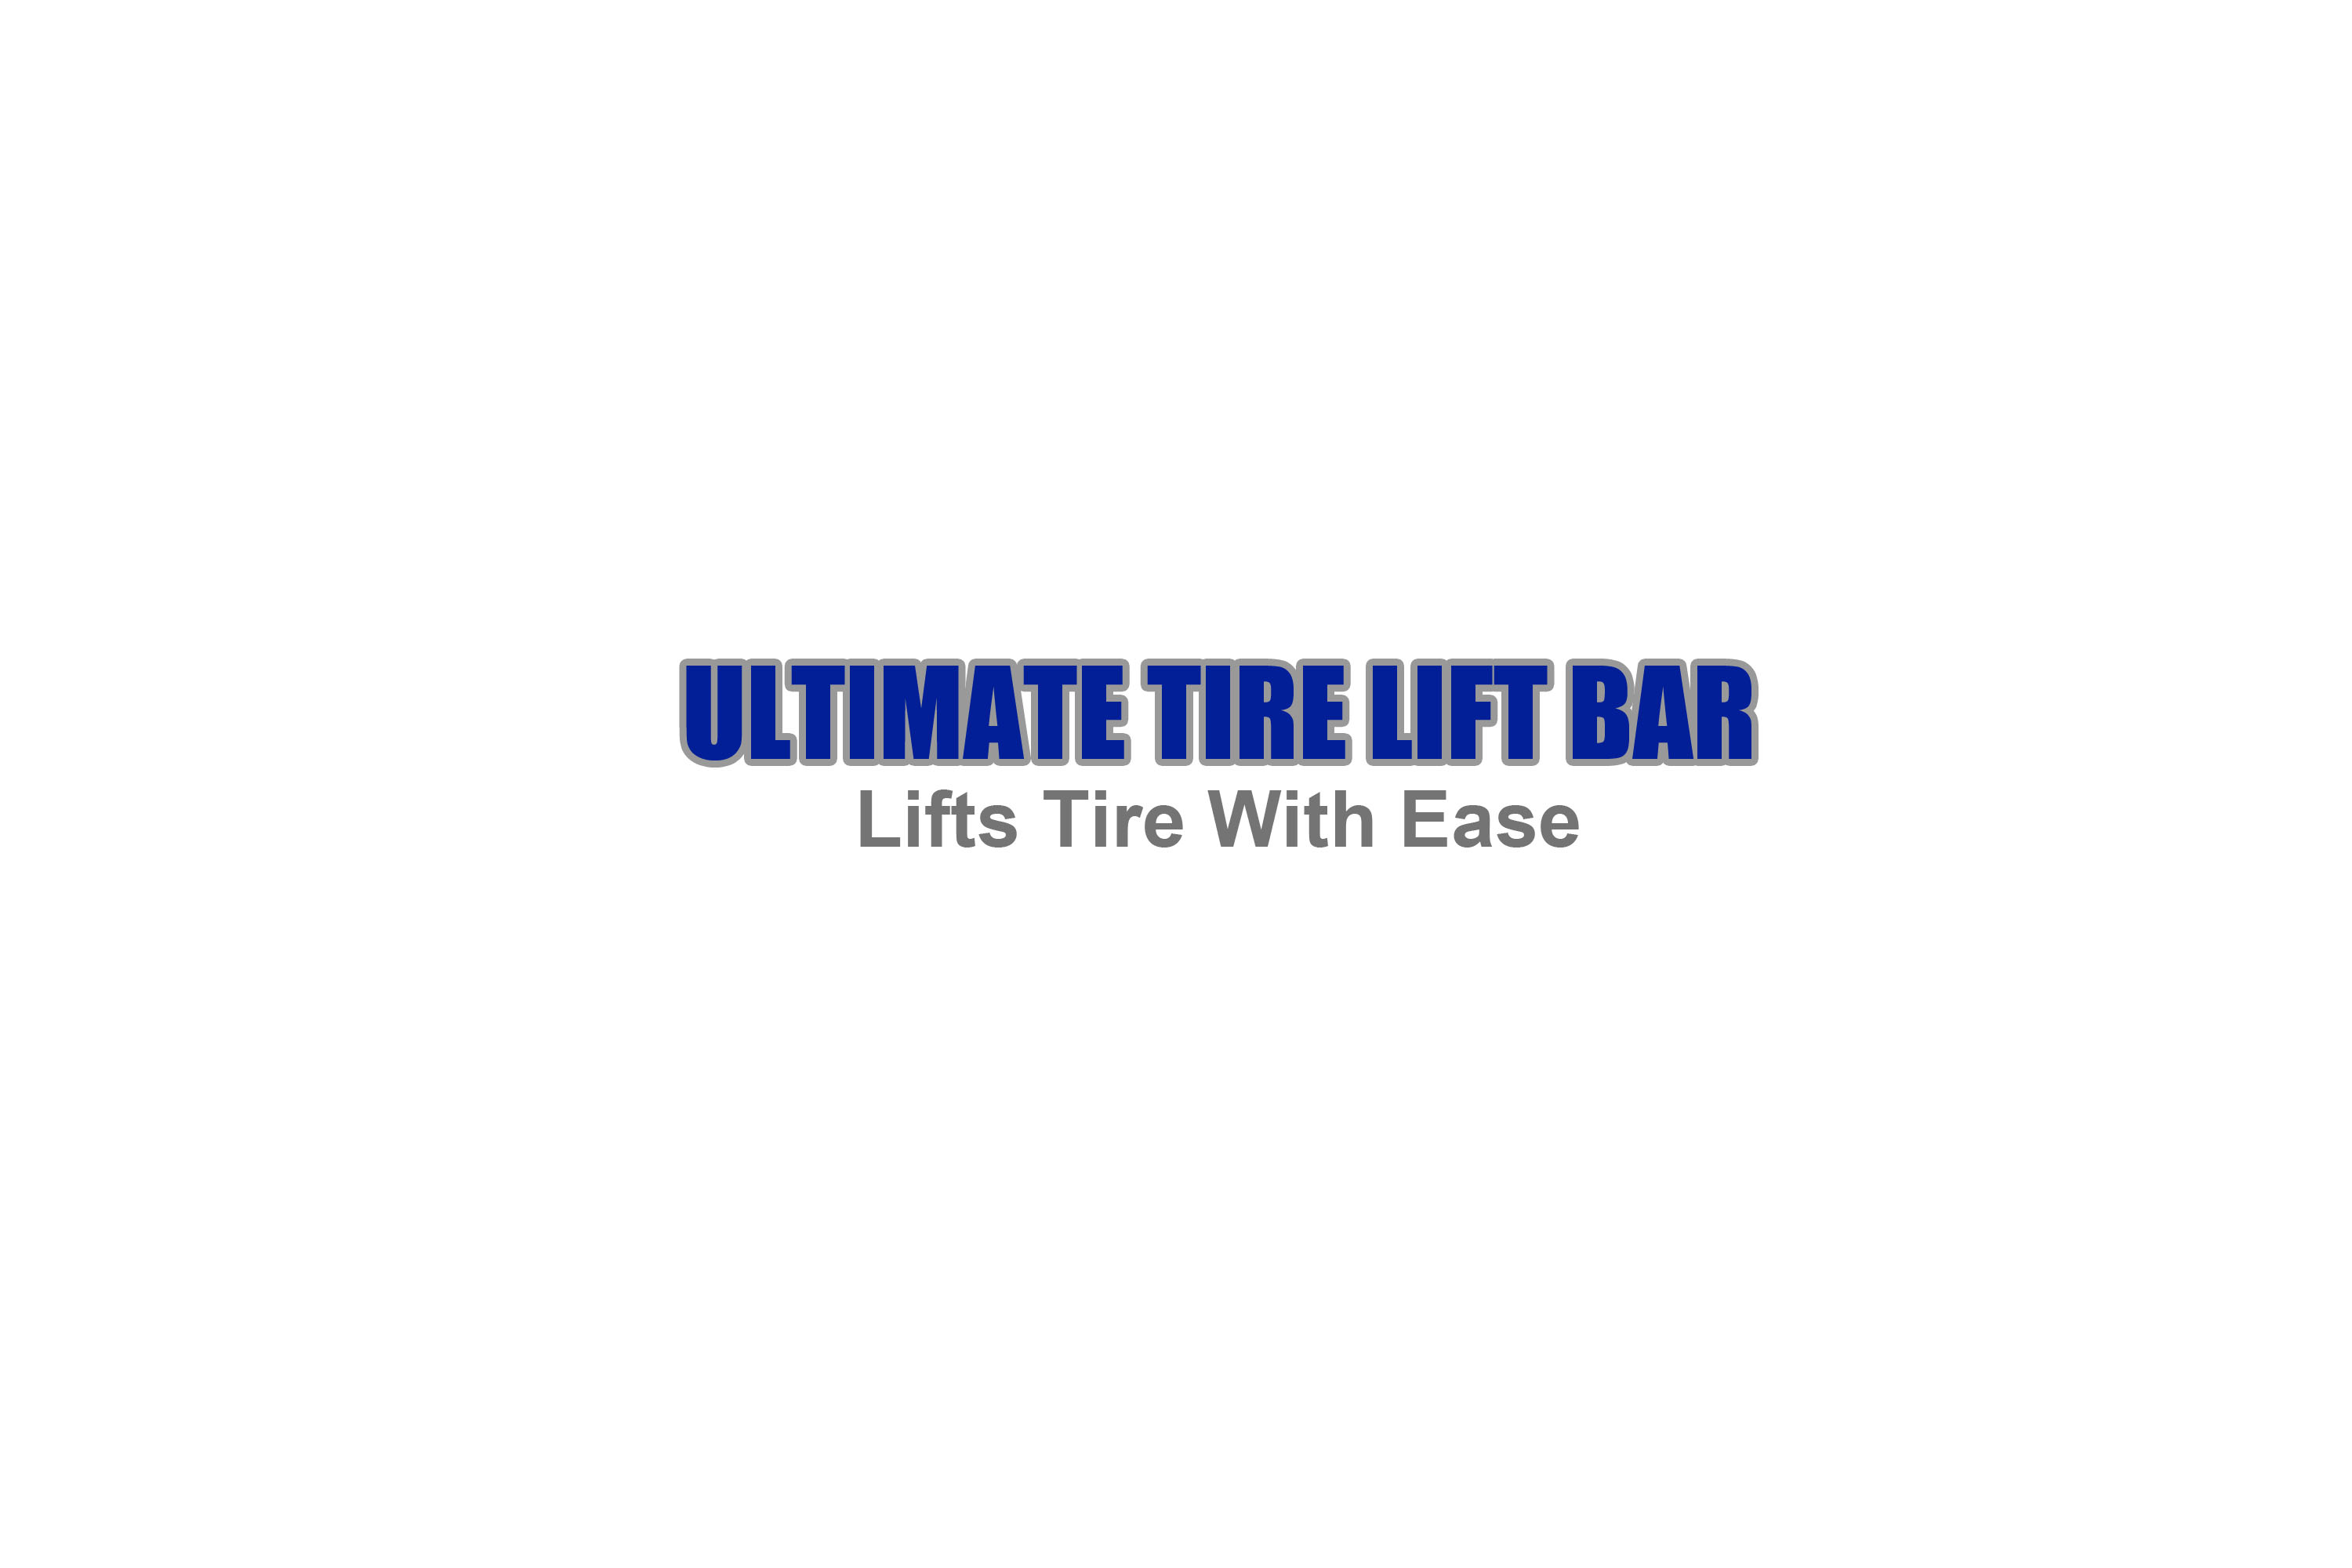 The Ultimate Tire Lift Bar is a utility patent  created to provide additional help and support when changing tires